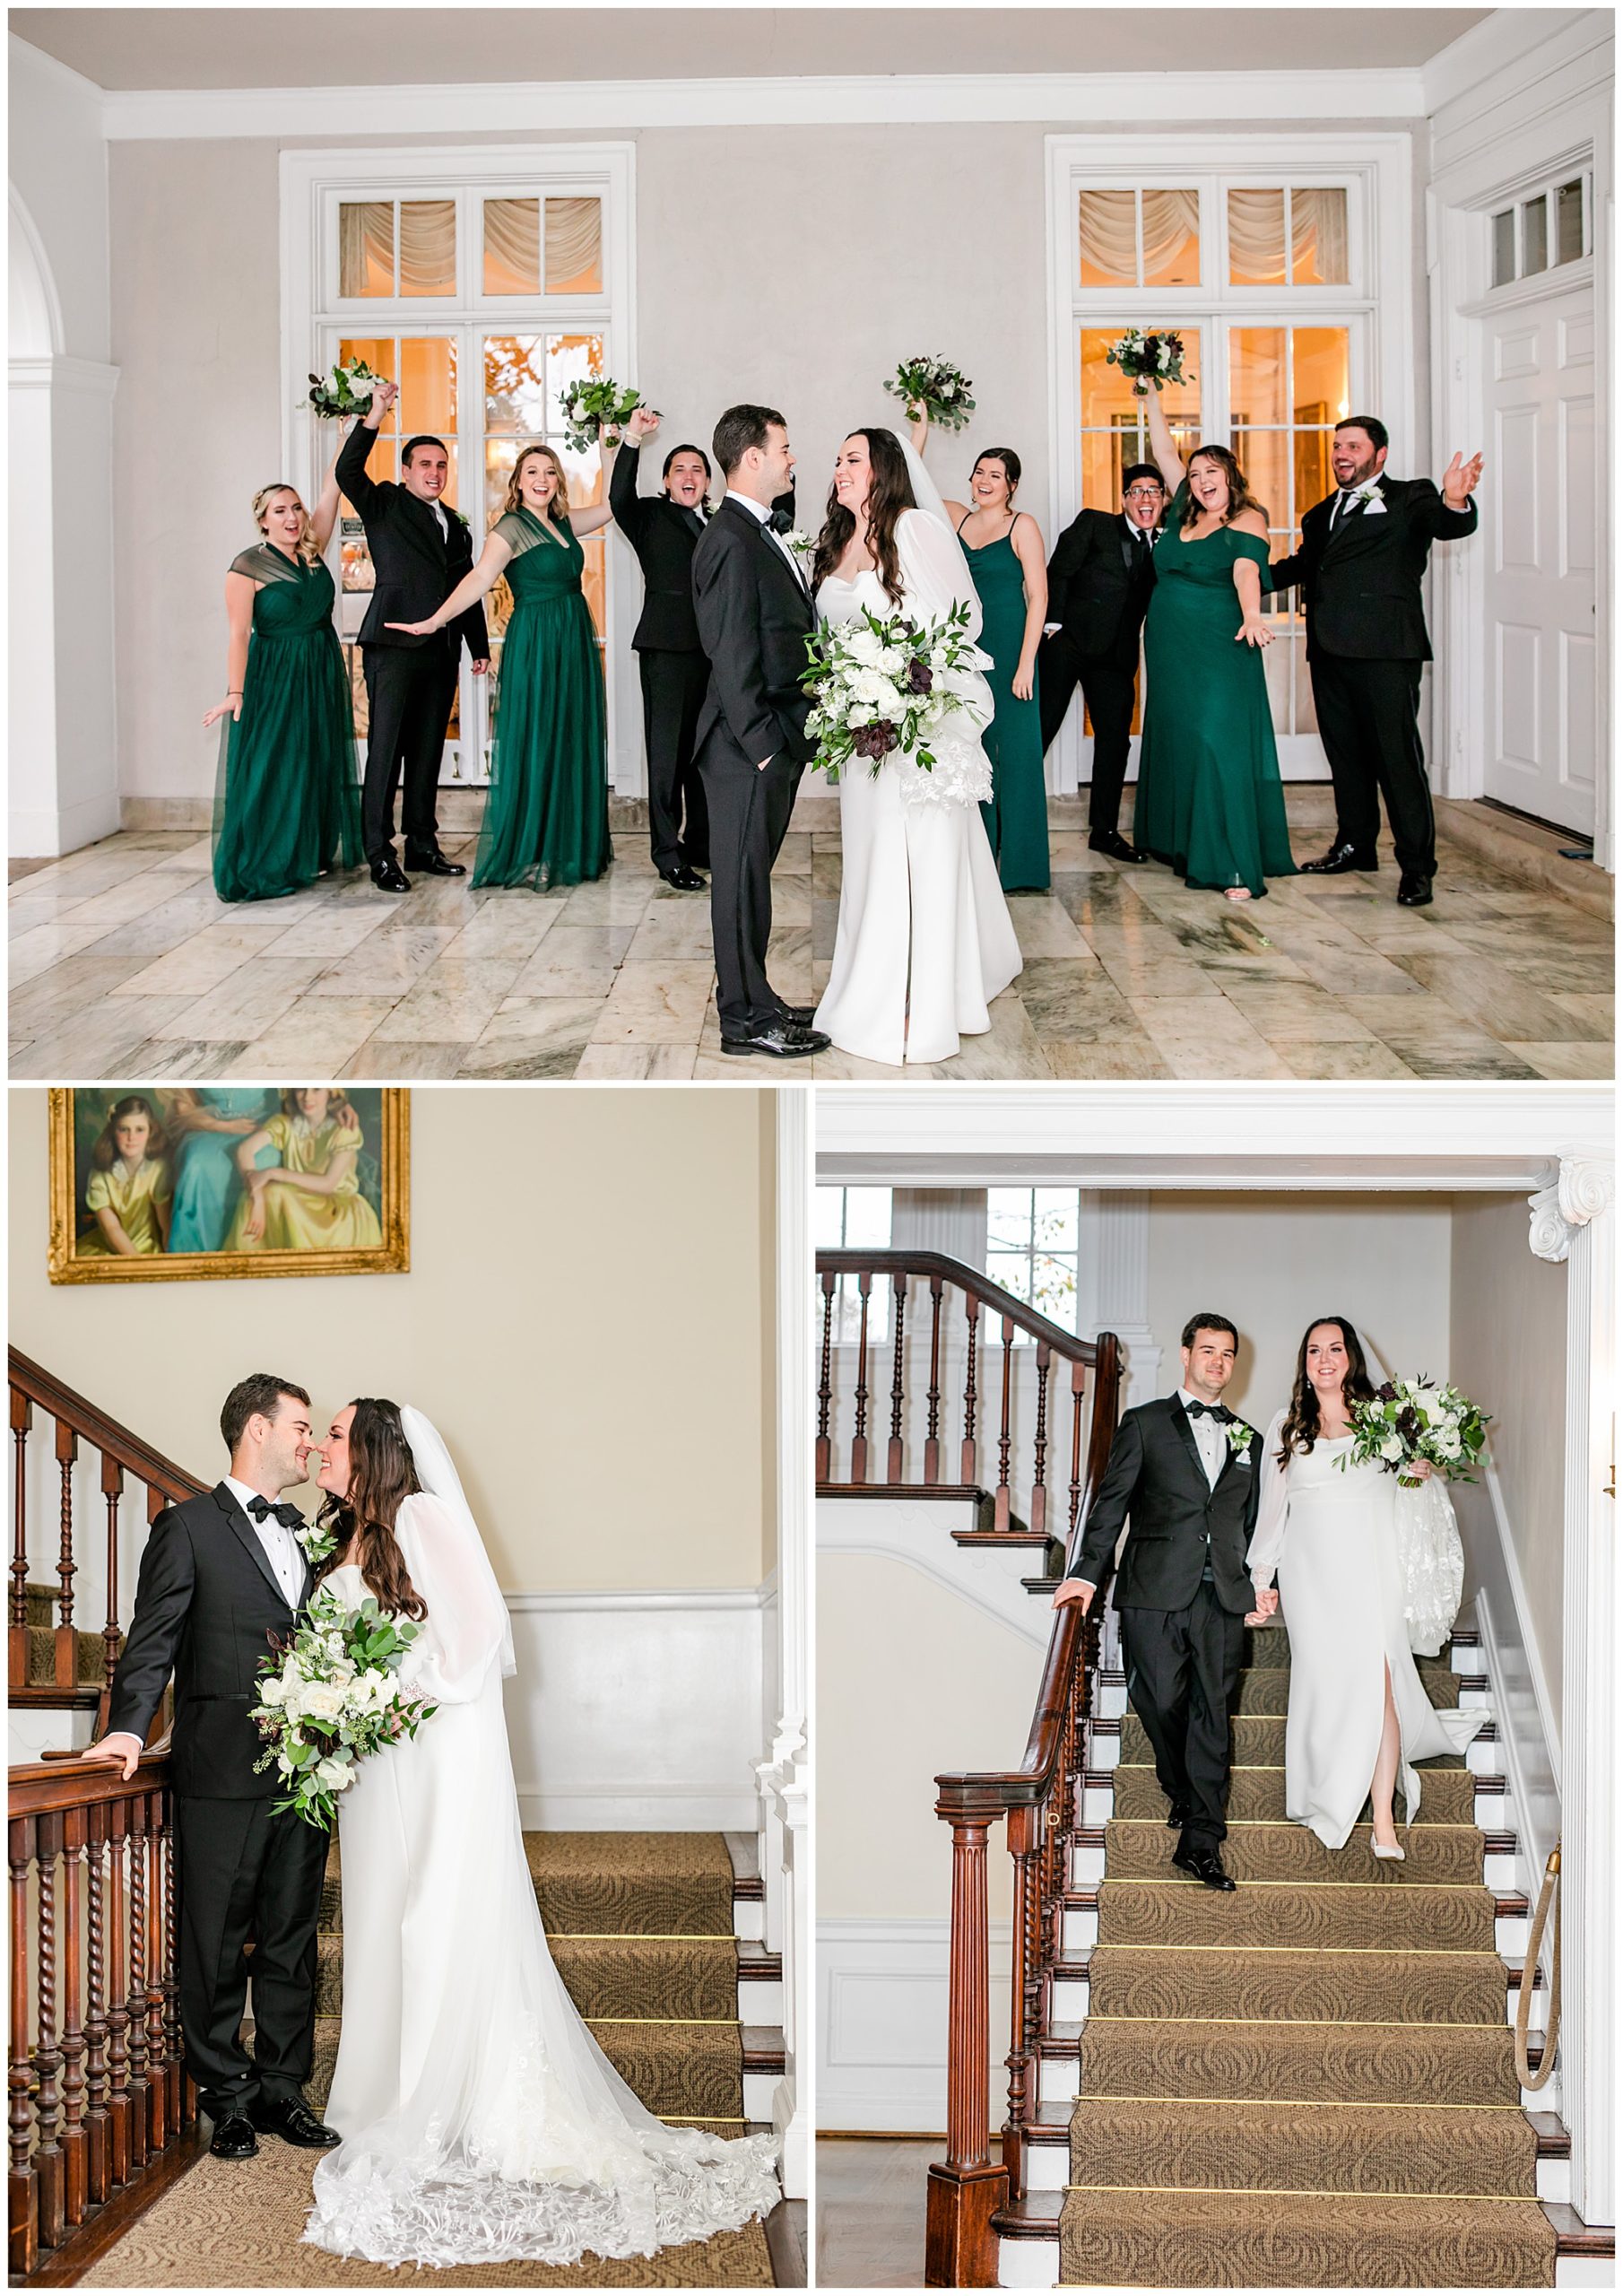 emerald and ivory Woodend Sanctuary wedding, autumn Woodend Sanctuary wedding, rainy day wedding, Maryland wedding venues, Chevy Chase MD wedding venue, mansion wedding, manor house wedding, indoor wedding, DC wedding venue, DC wedding photographer, Baltimore wedding photographer, Rachel E.H. Photography, emerald and ivory aesthetic, bride and groom with wedding party, bridesmaids holding bouquets, Flowers at 38, bride and groom walking down stairs